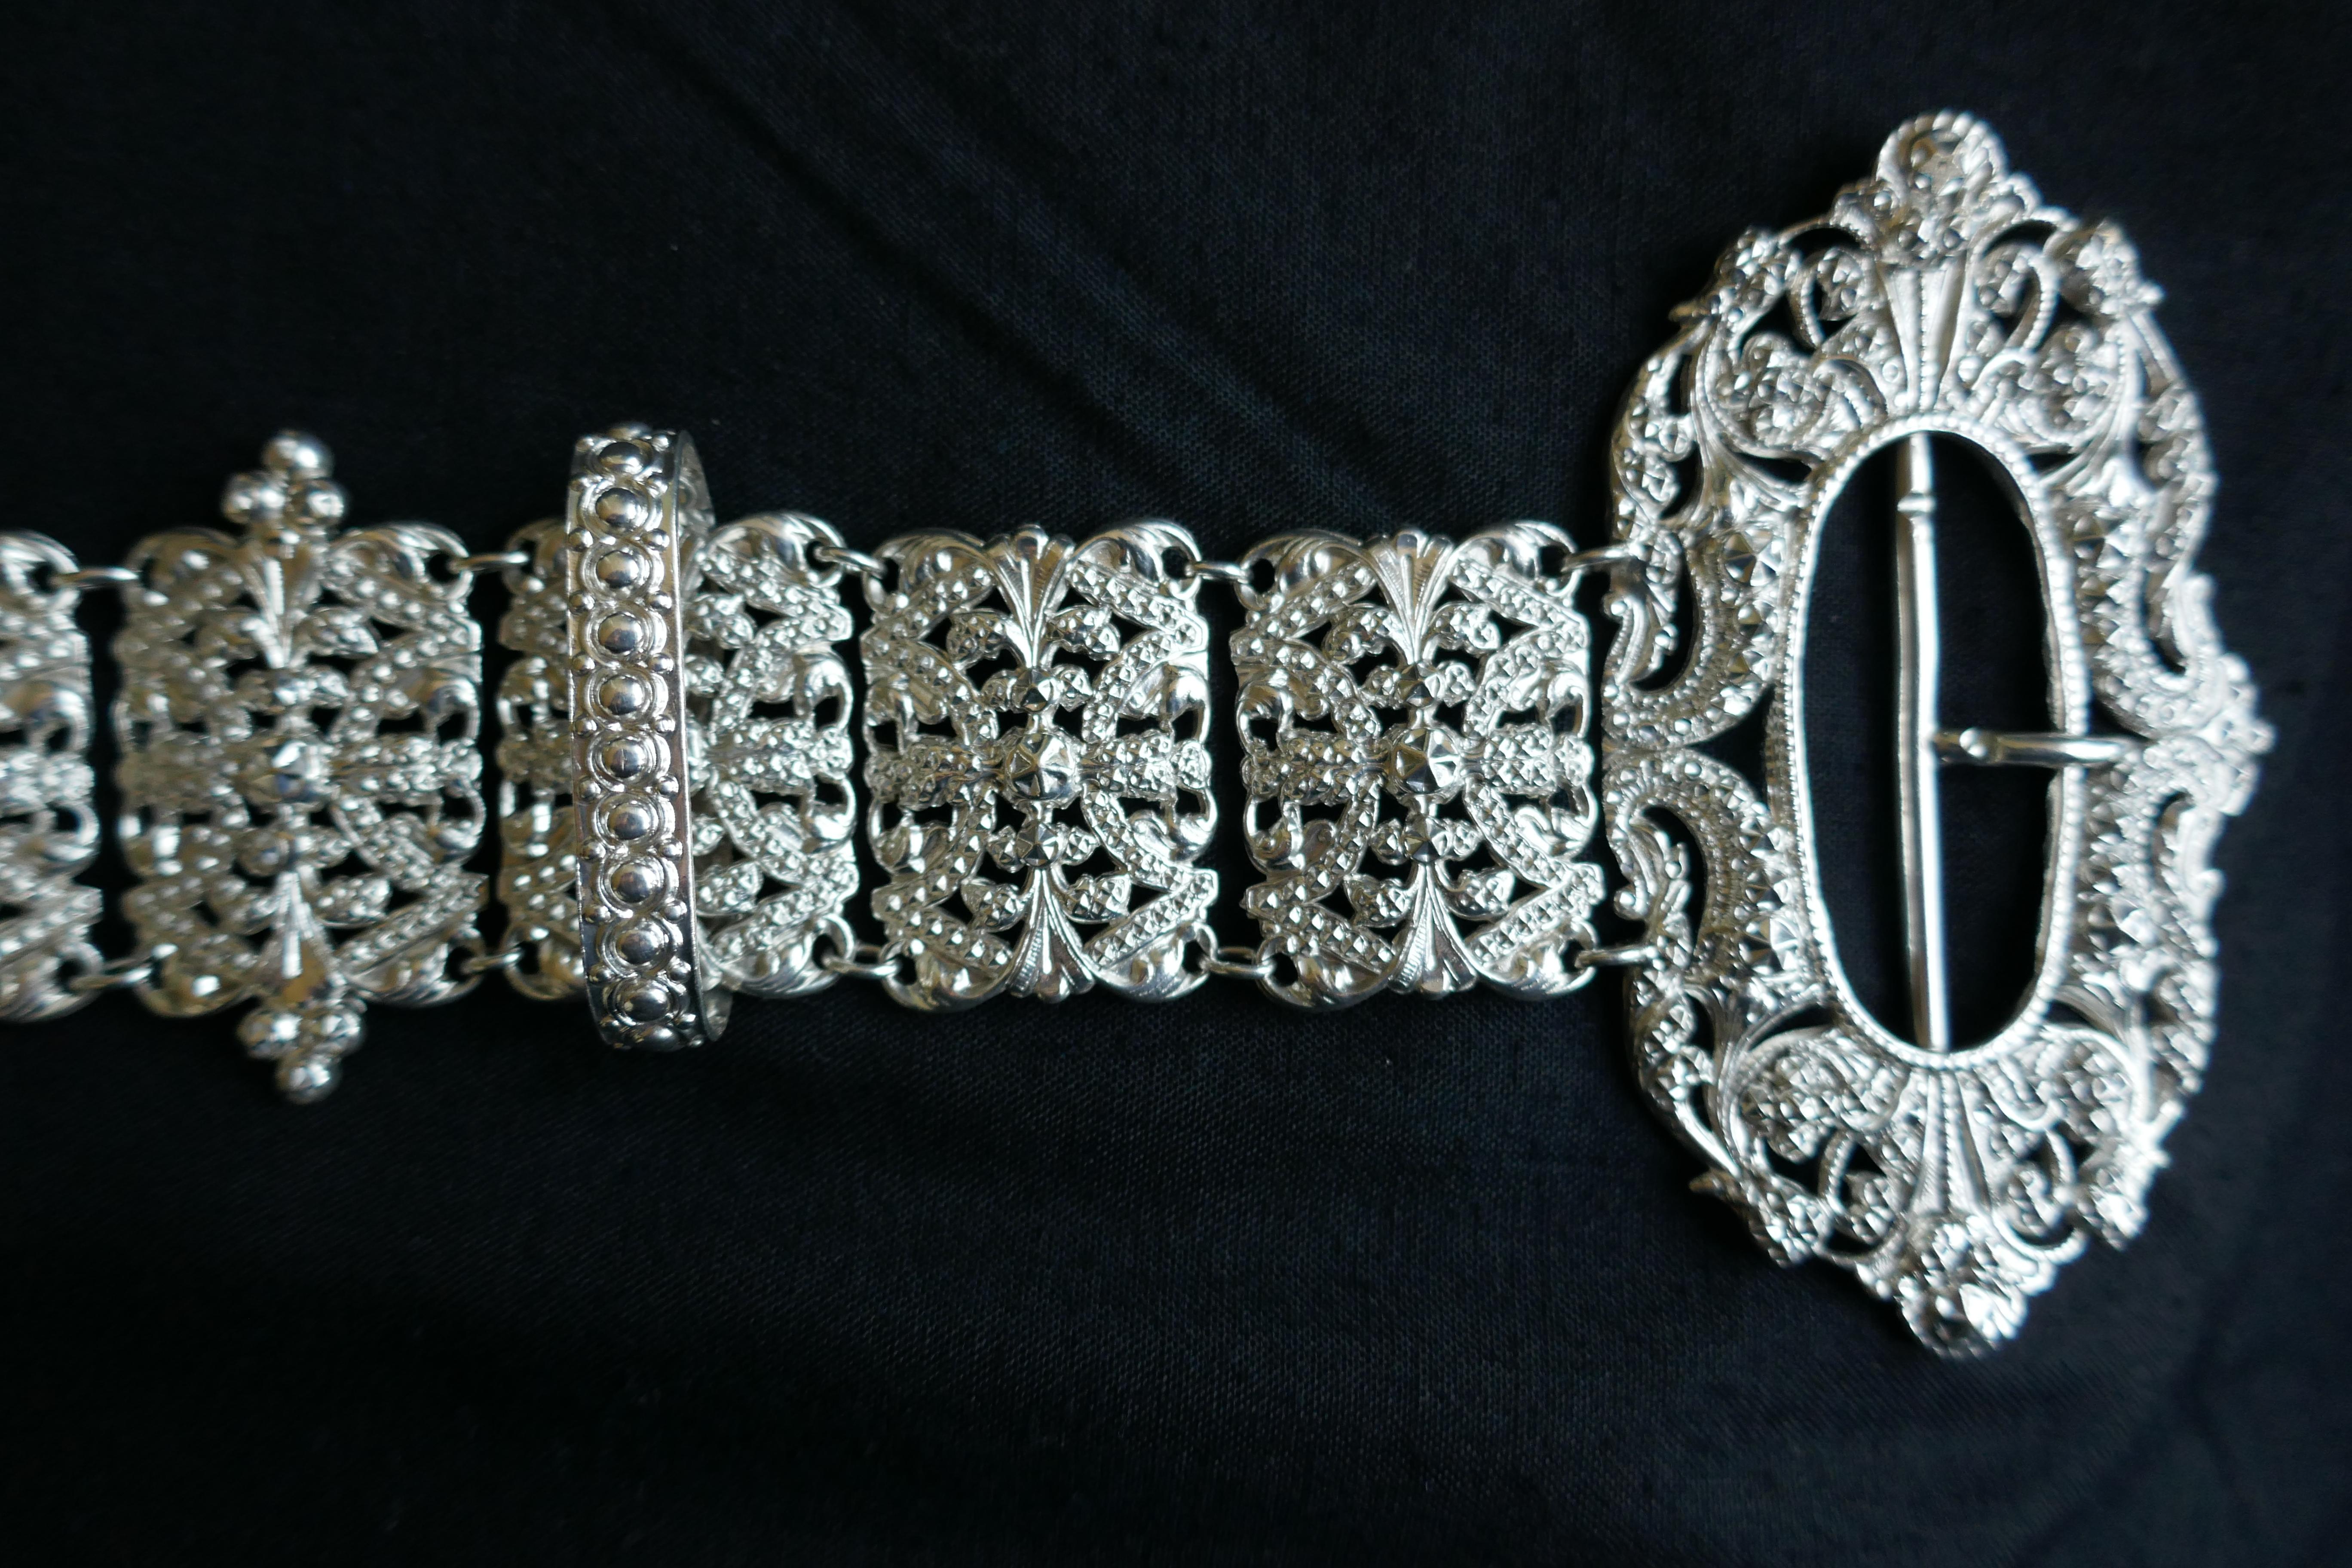 French Arts and Crafts Silver Belt, Articulated Links with Chatelaine Ring For Sale 1